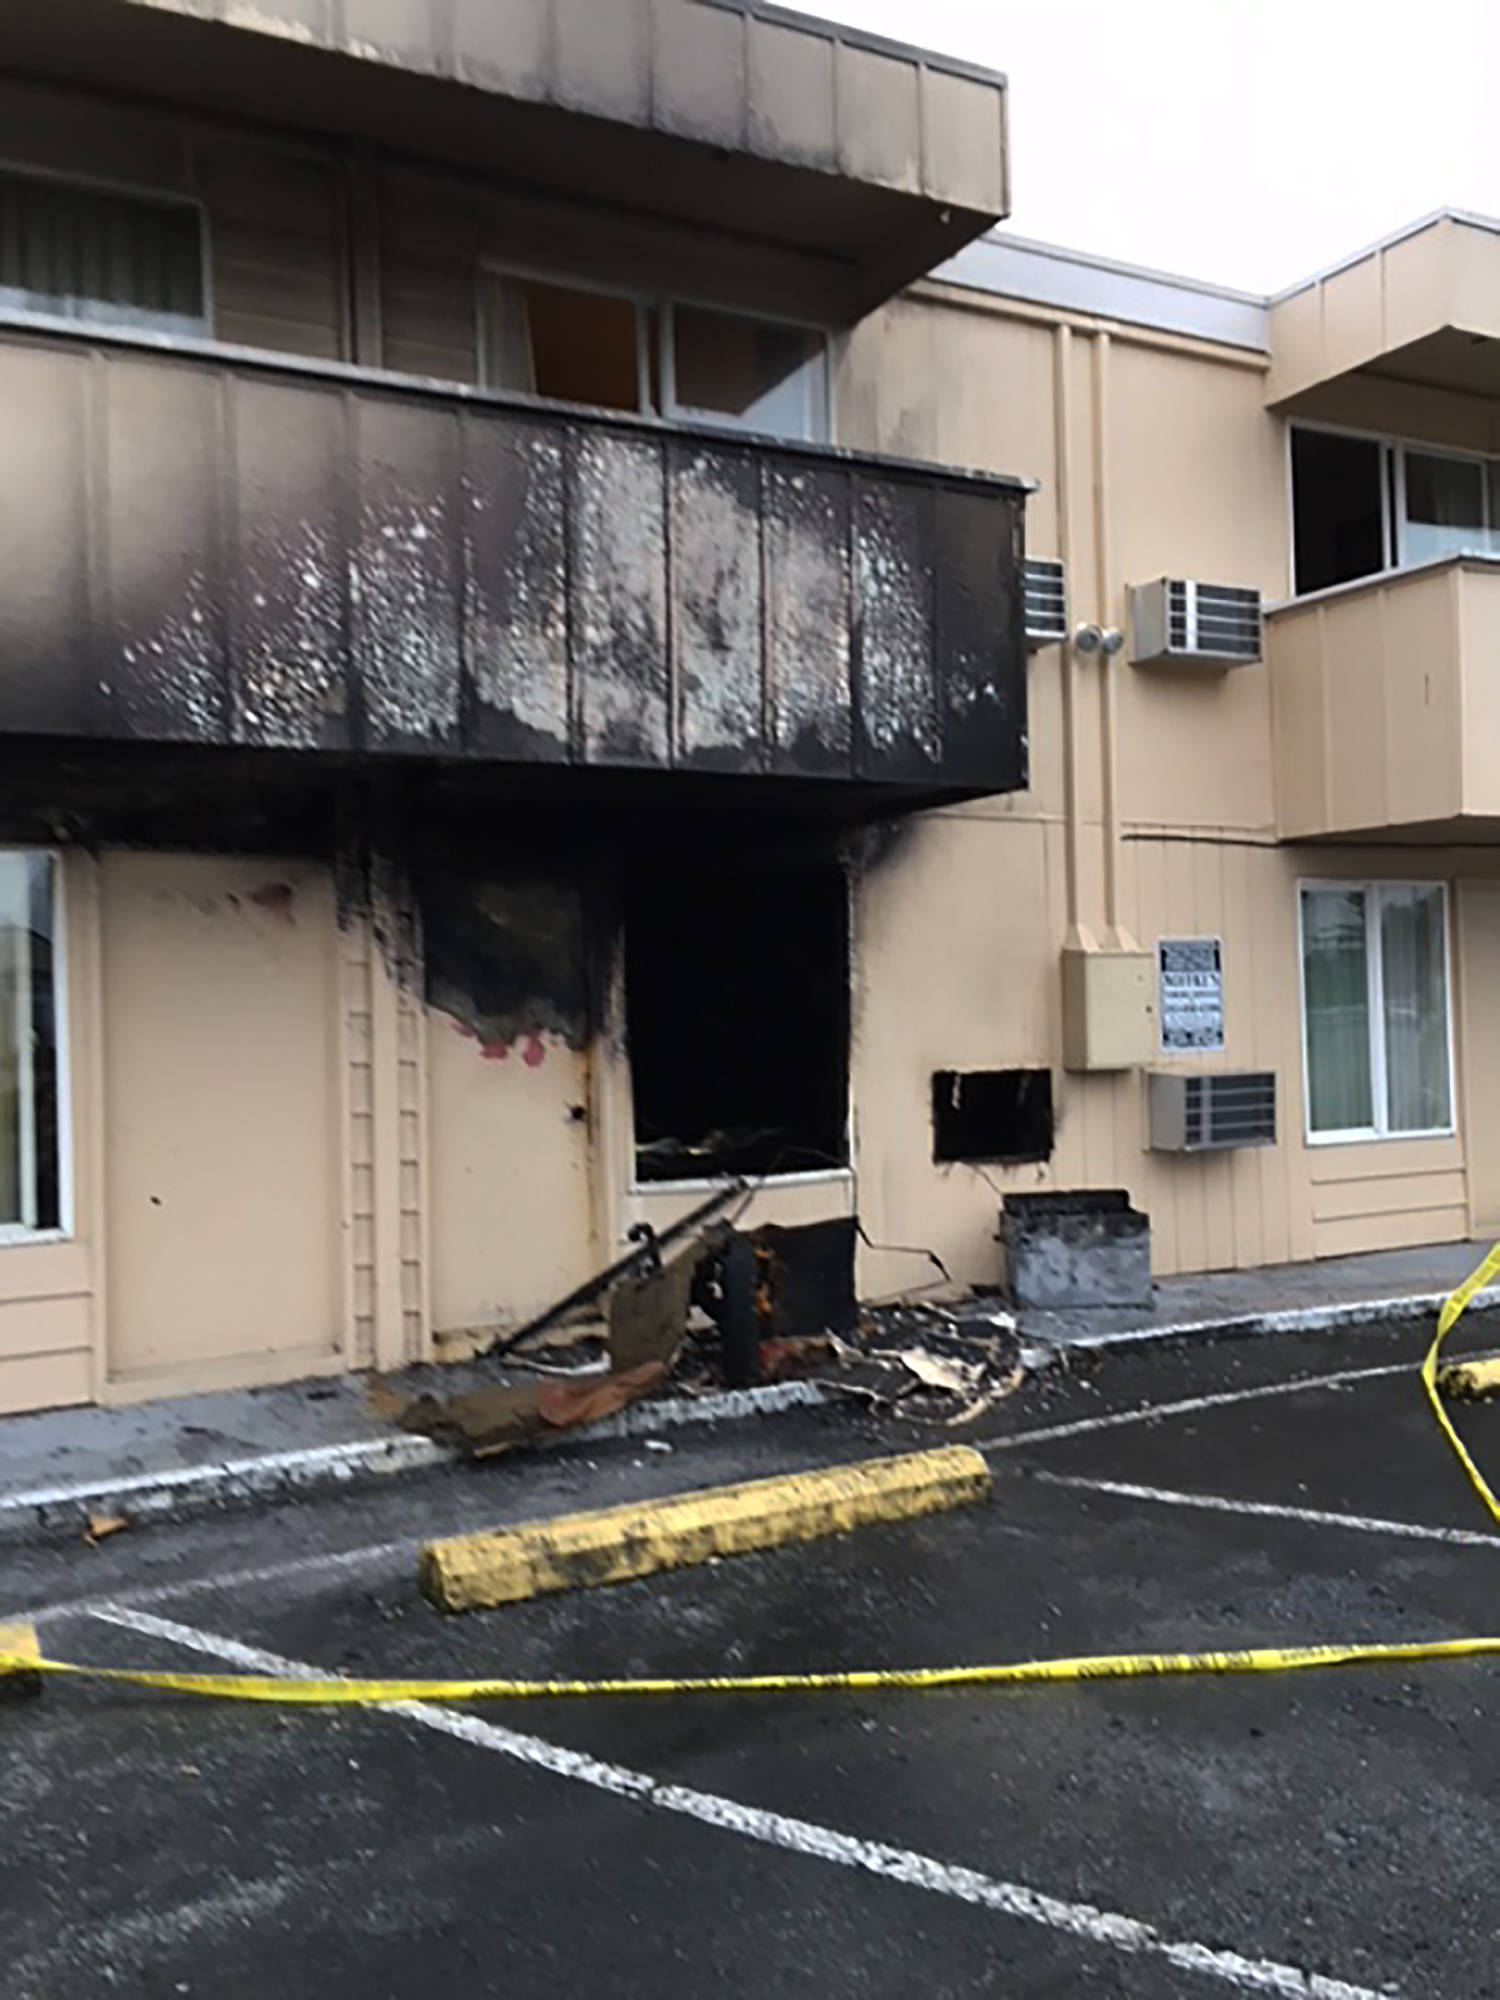 VRFA crews extinguished a fire that damaged the Auburn Motel early Friday morning. No one was hurt as Auburn Police helped to evacuate the building before firefighters arrived. COURTESY PHOTO, VRFA